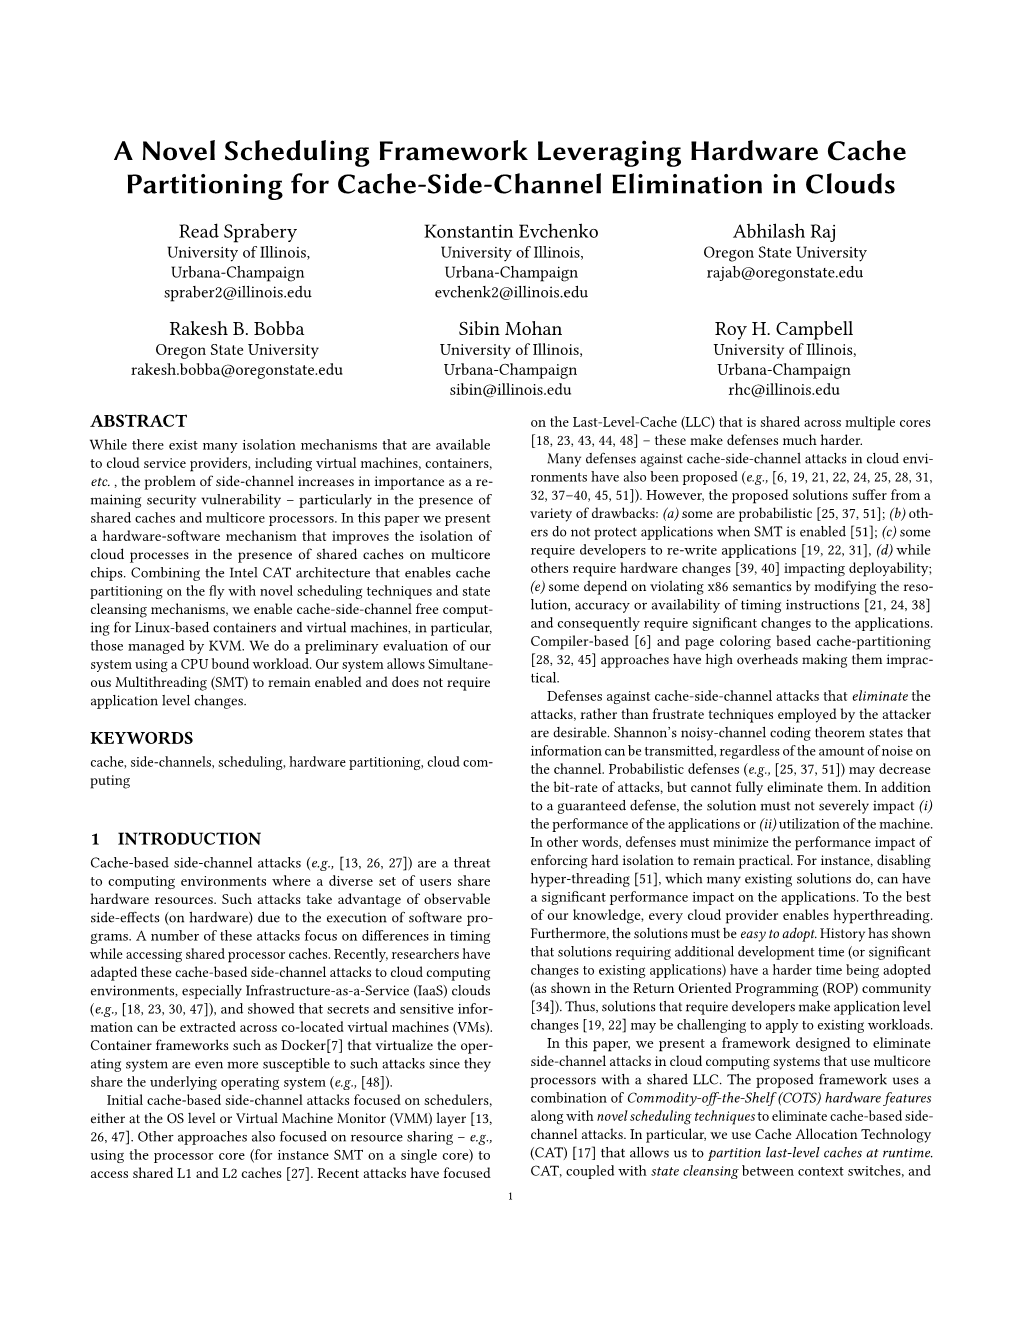 A Novel Scheduling Framework Leveraging Hardware Cache Partitioning for Cache-Side-Channel Elimination in Clouds